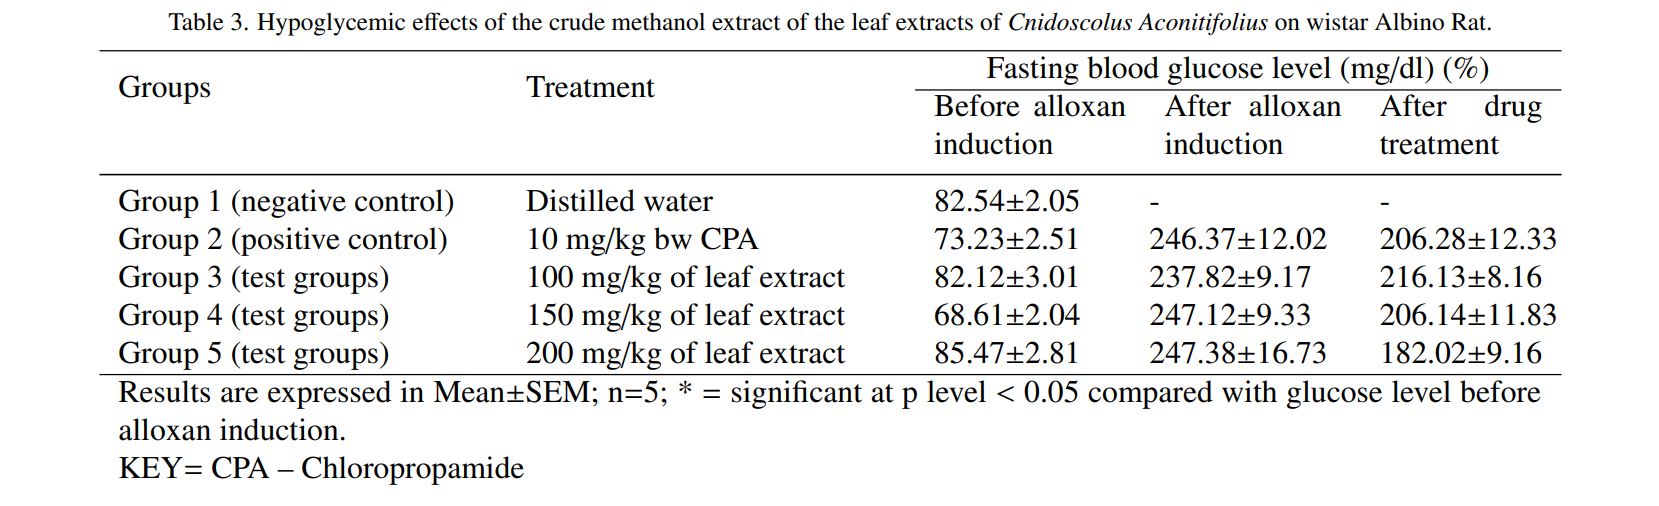 Hypoglycemic effects of the crude methanol extract of the leaf extracts of Cnidoscolus Aconitifolius on wistar Albino Rat.